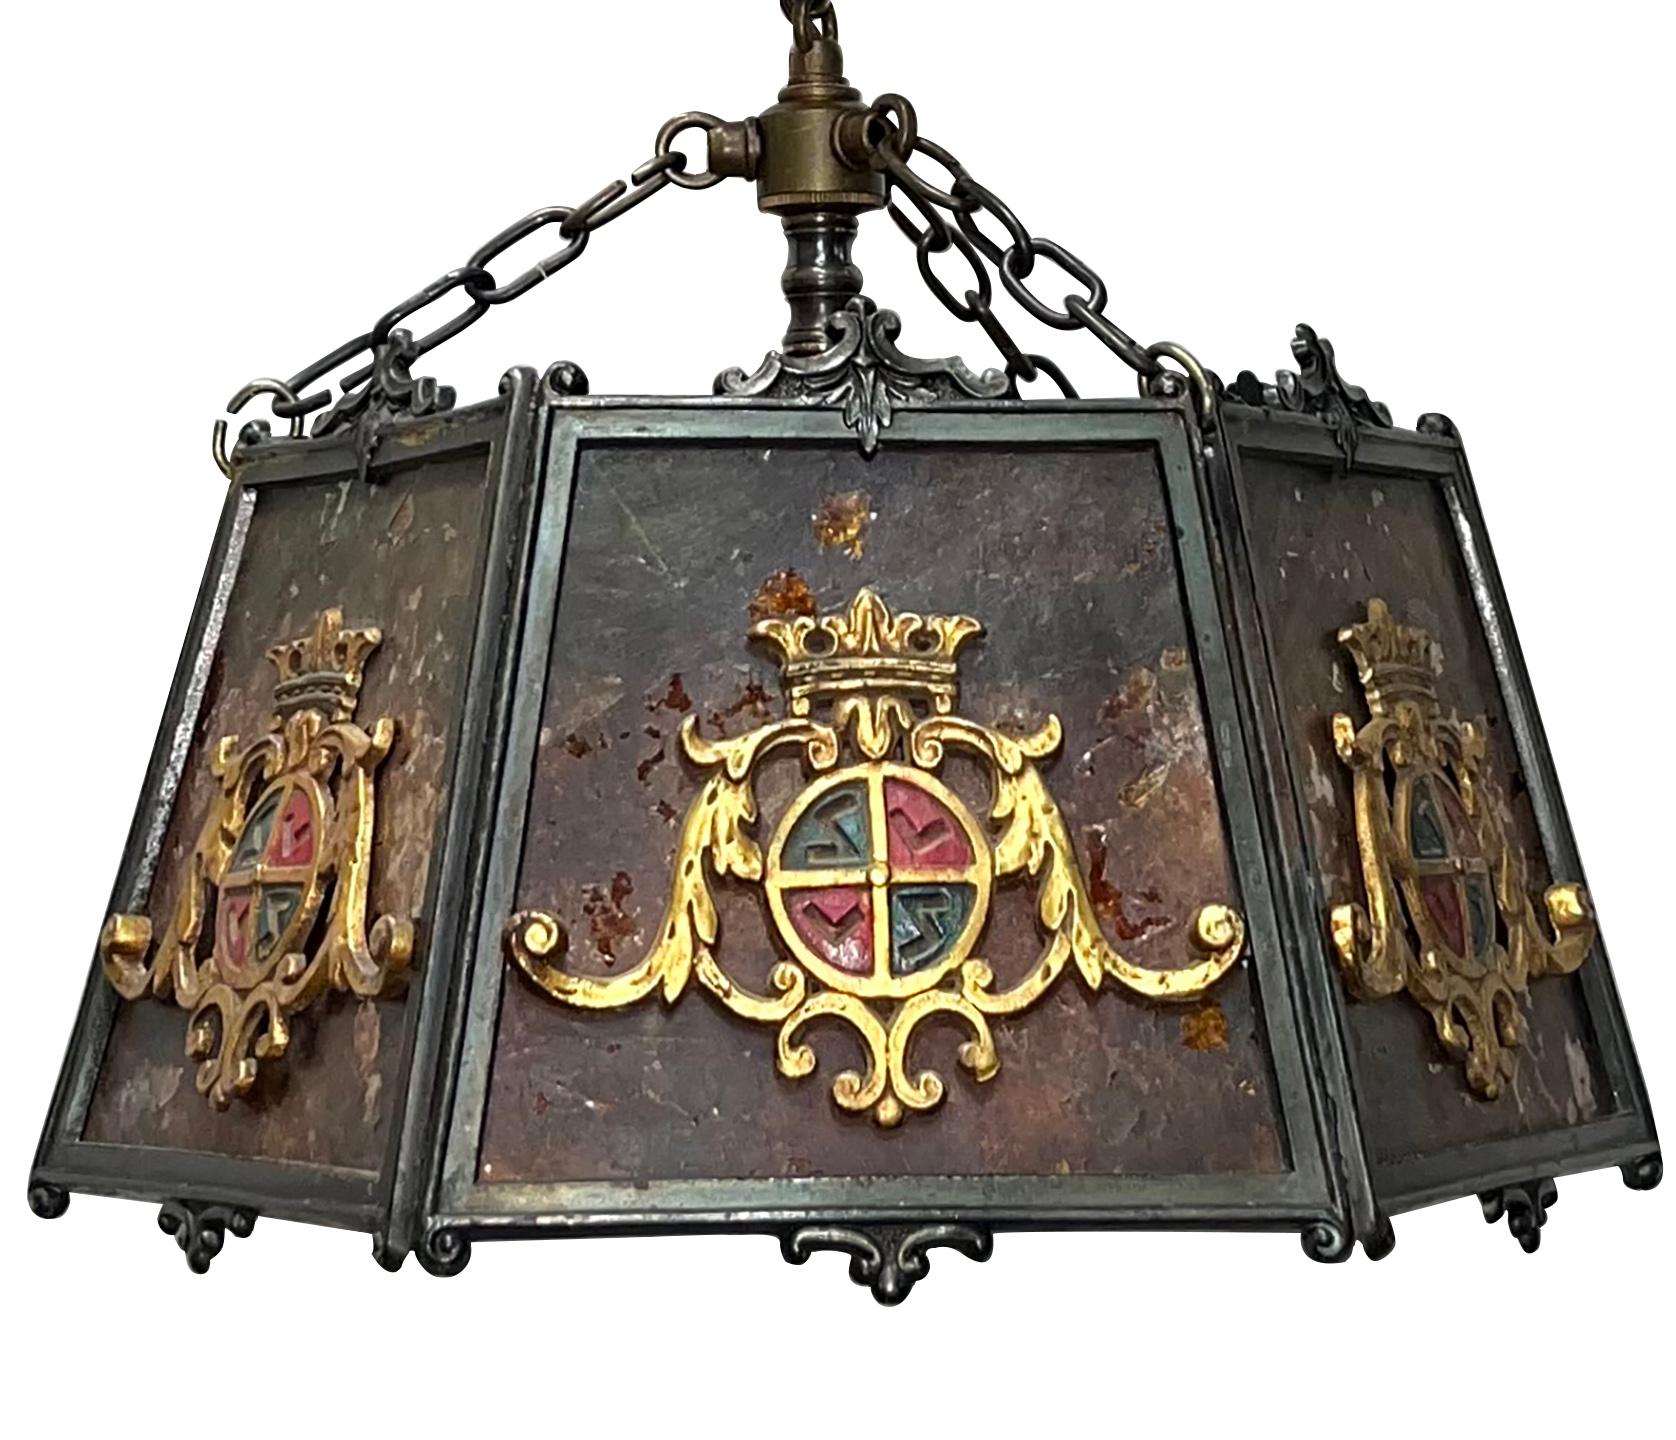 An English circa 1920's patinated bronze and mica lantern with coat-of-arms on side pannels.

Measurements:
Diameter: 13